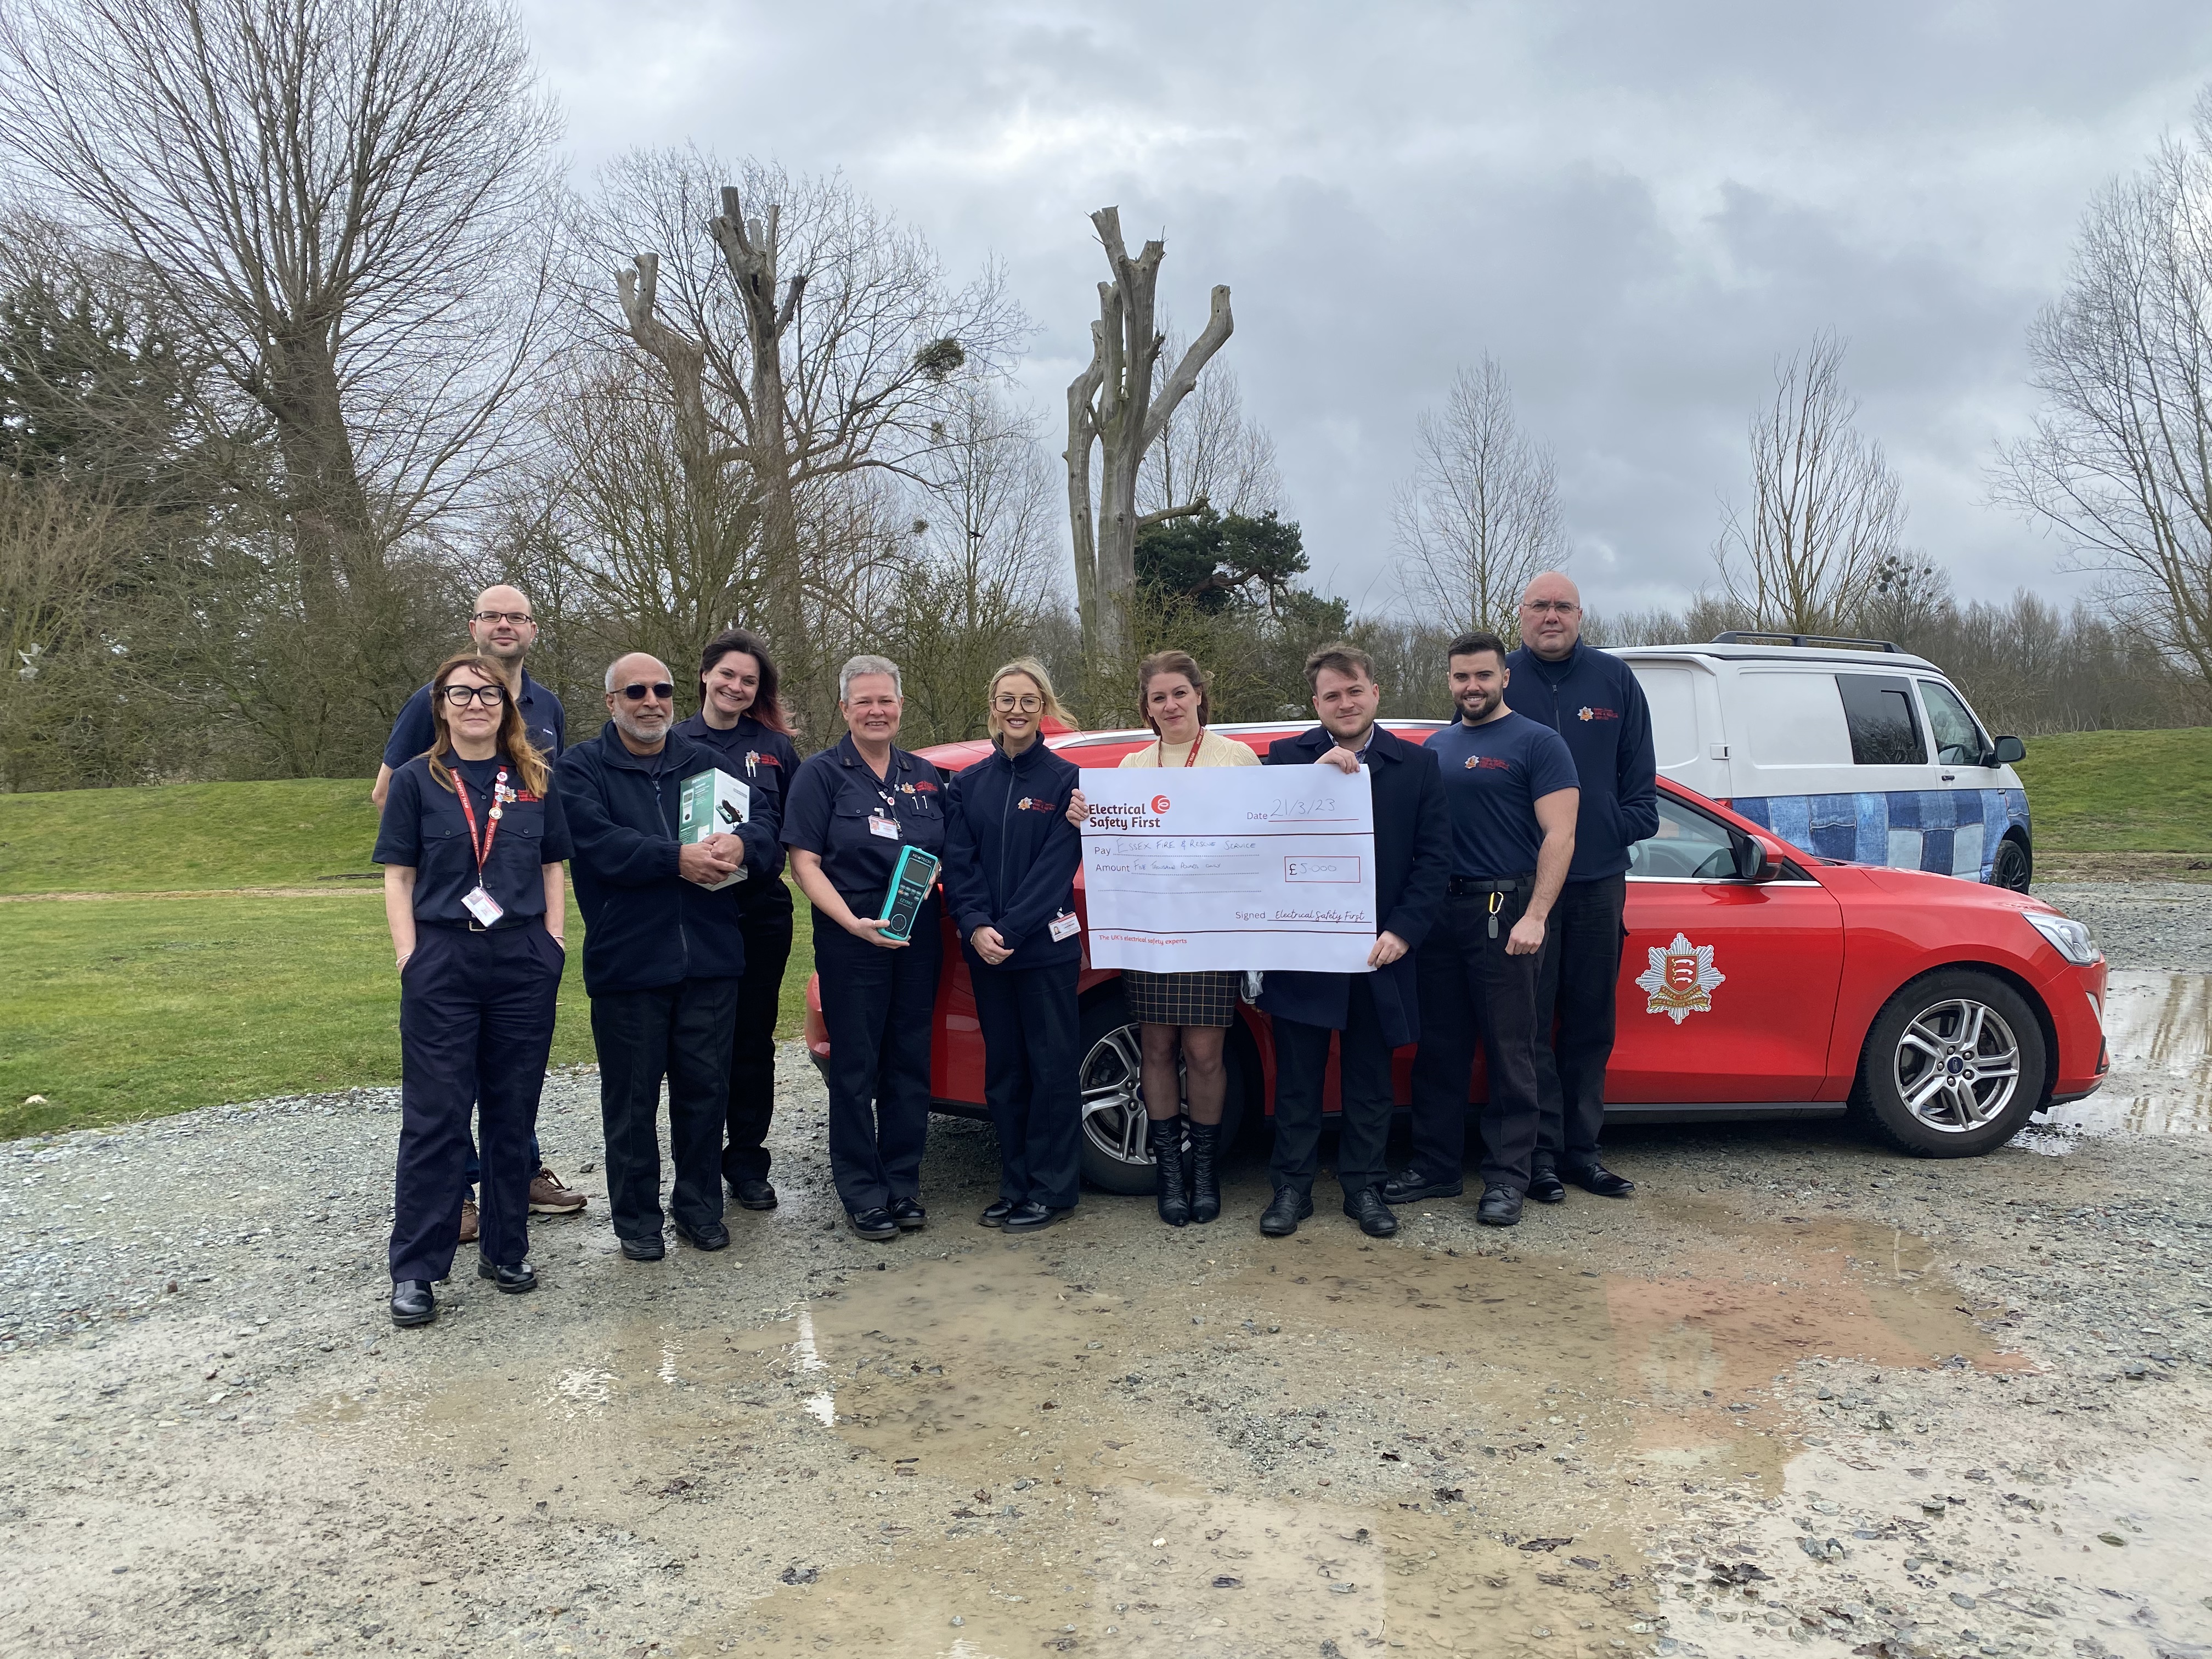 Members of the prevention team standing in front of a red car and holding a giant cheque